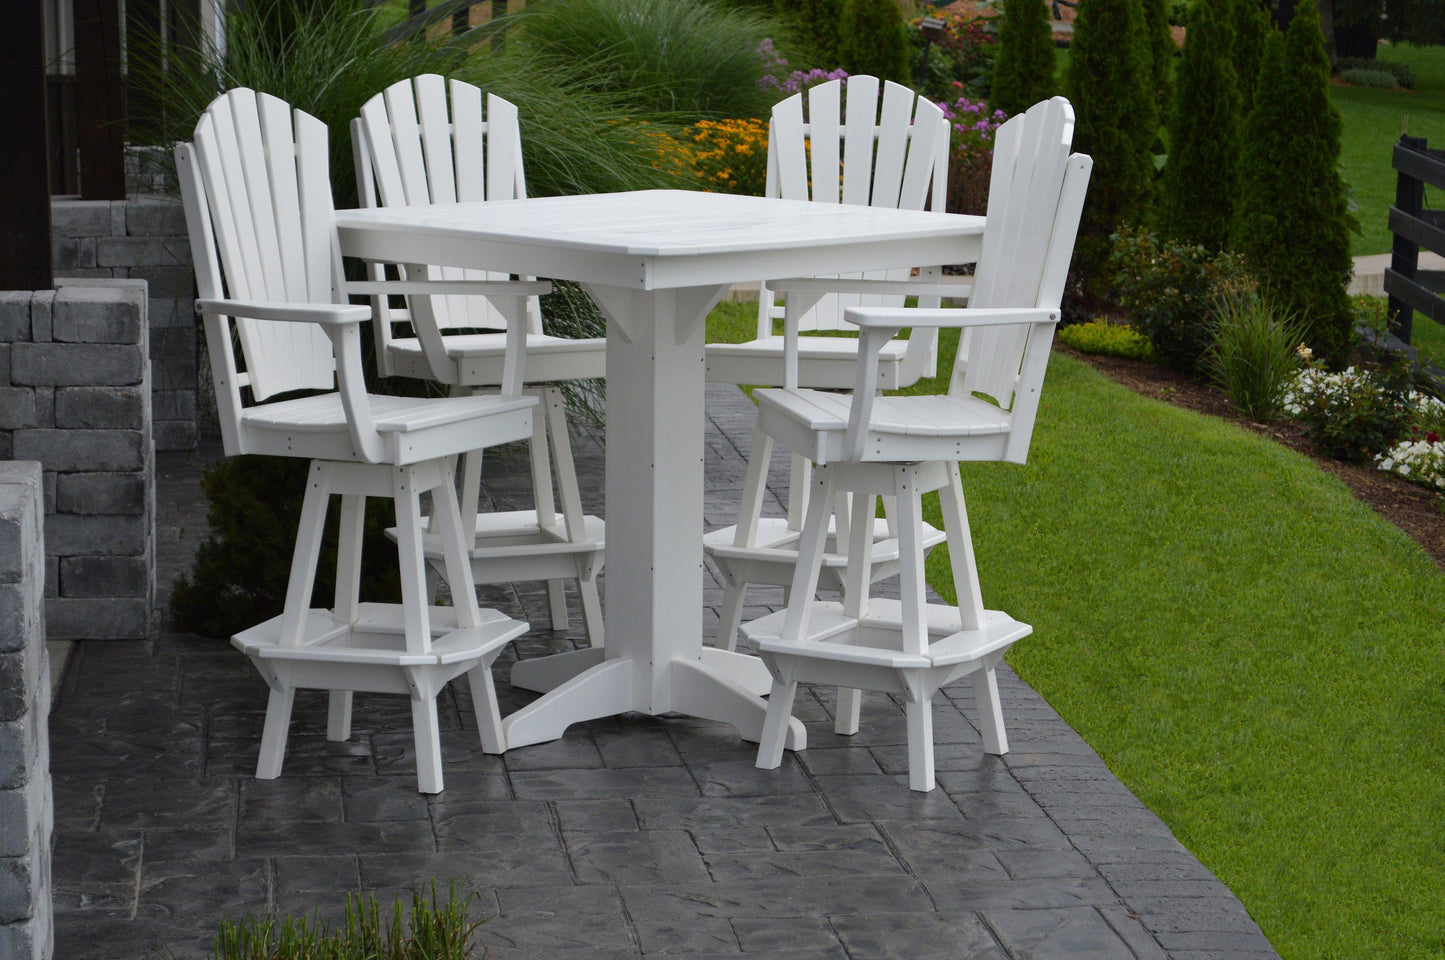 A&L Furniture Recycled Plastic 5 Piece Bar Height Square Table Set - White